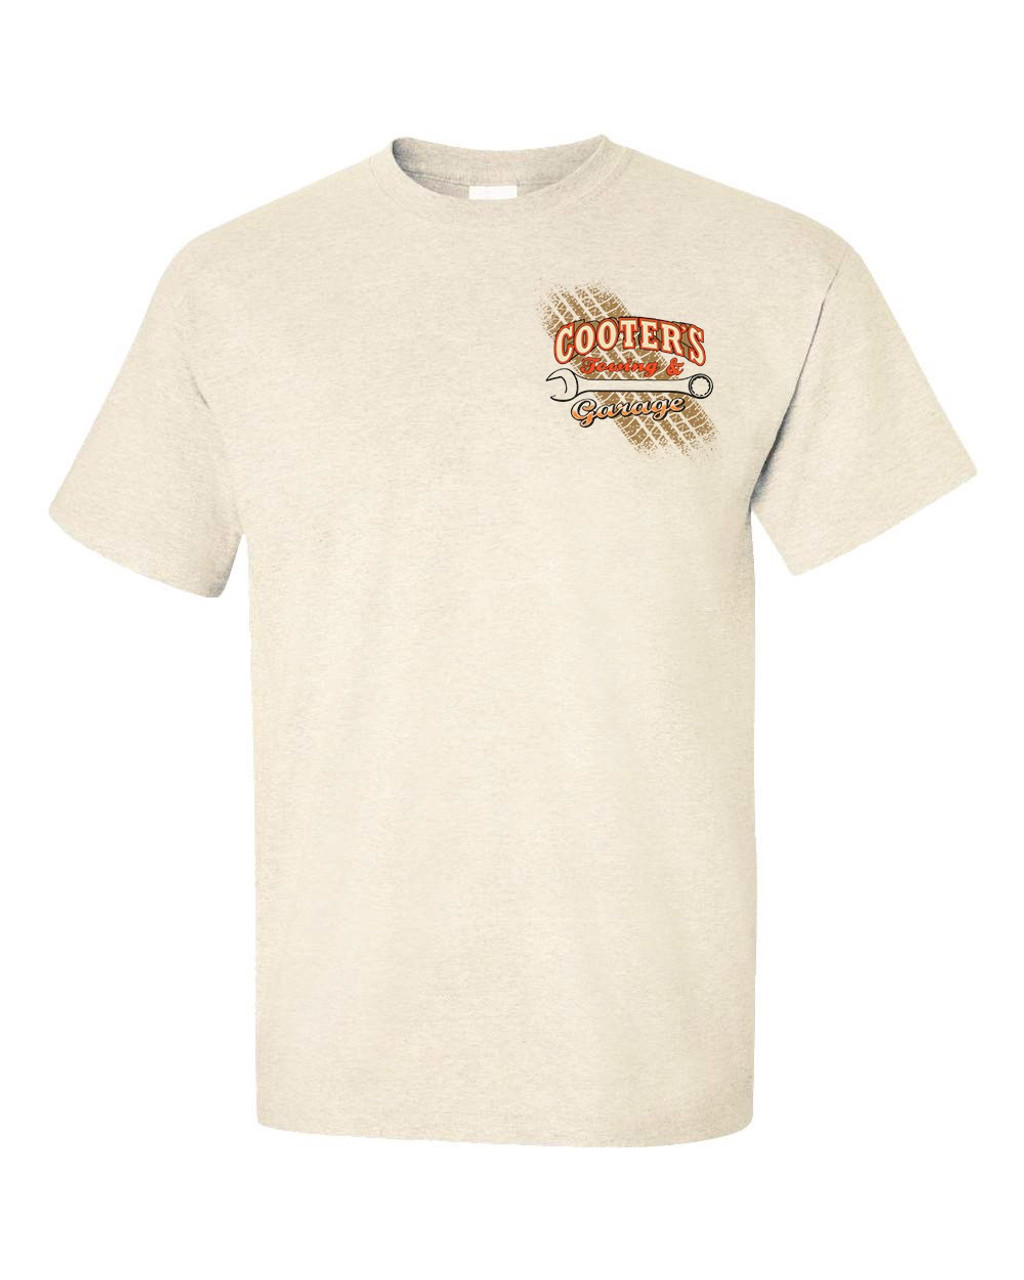 Cooter’s Vintage Tow Truck T-Shirt